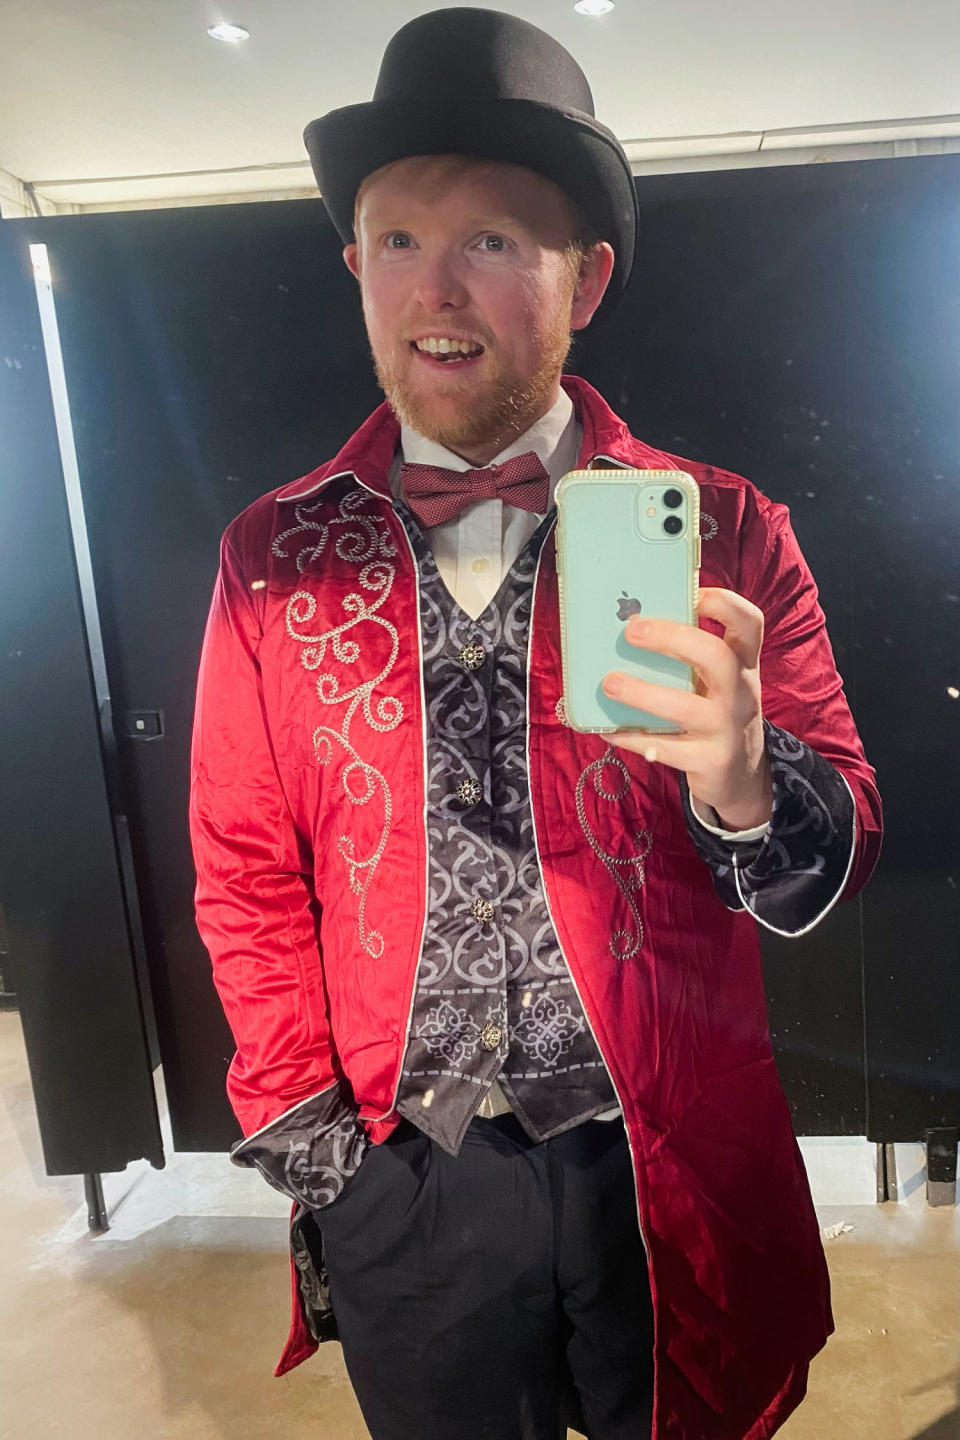 Paul Connell in his Willy Wonka costume (Paul Connell)